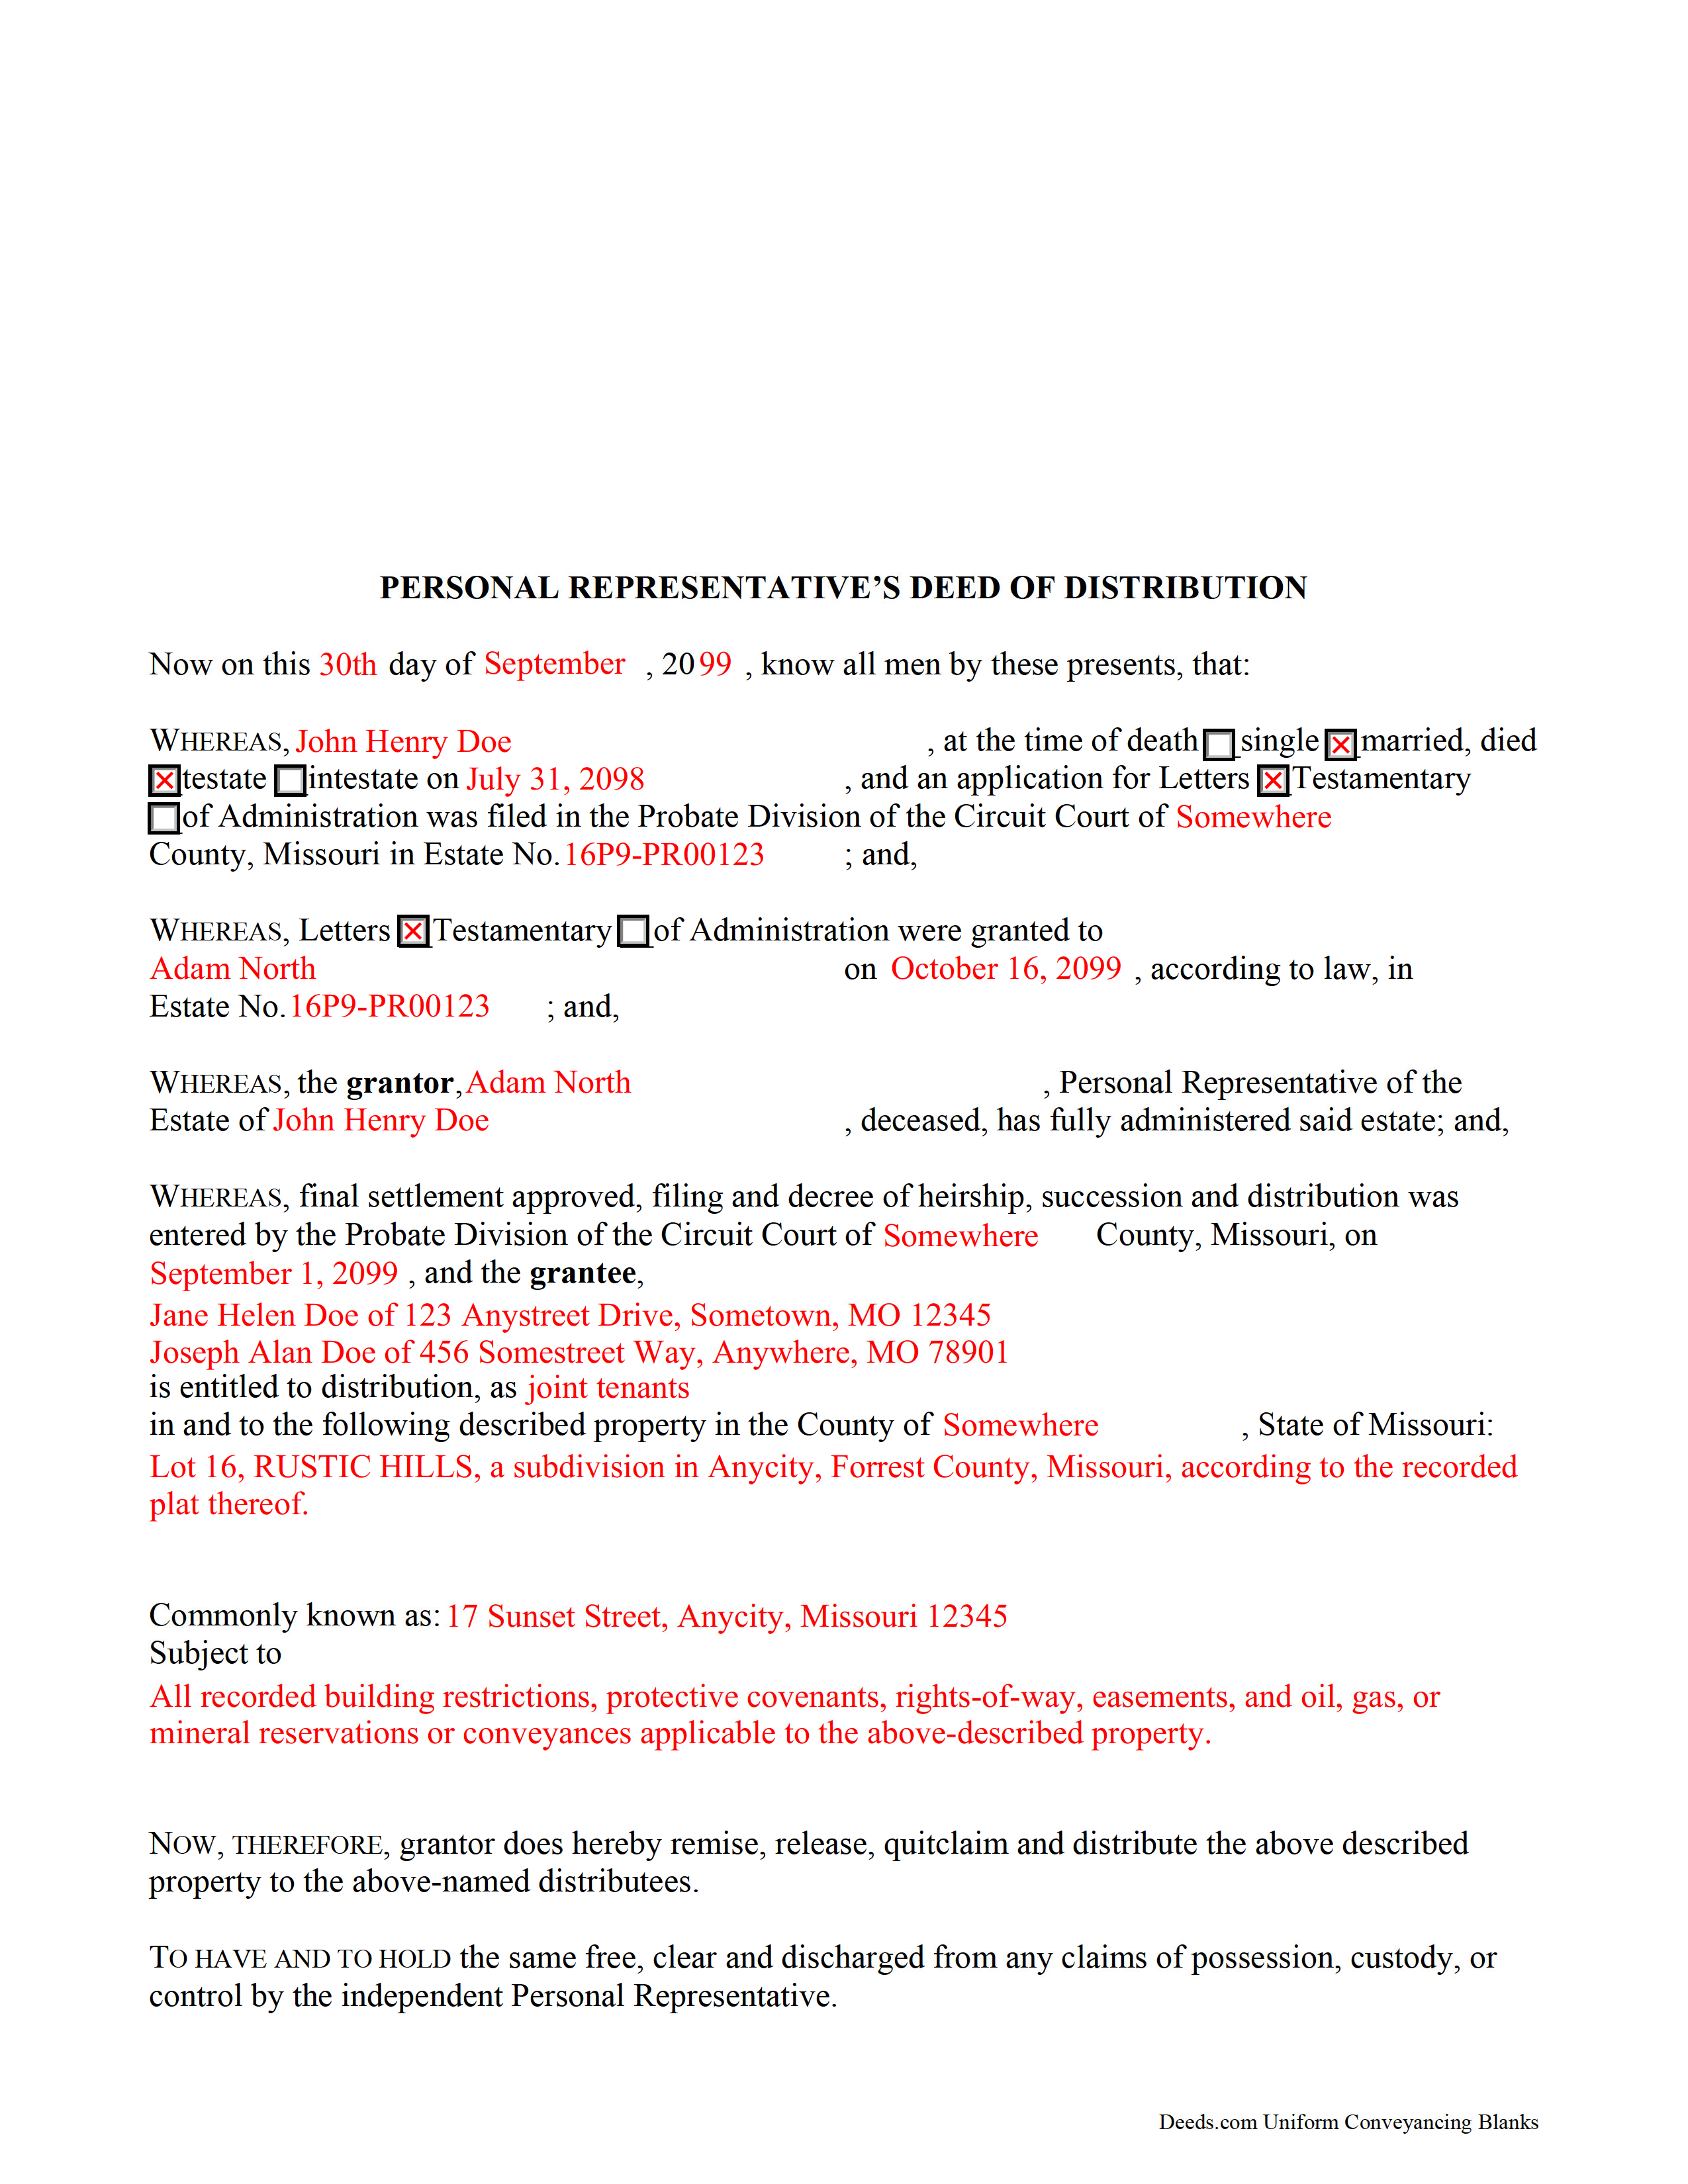 Completed Example of the Personal Representative Deed of Distribution Document